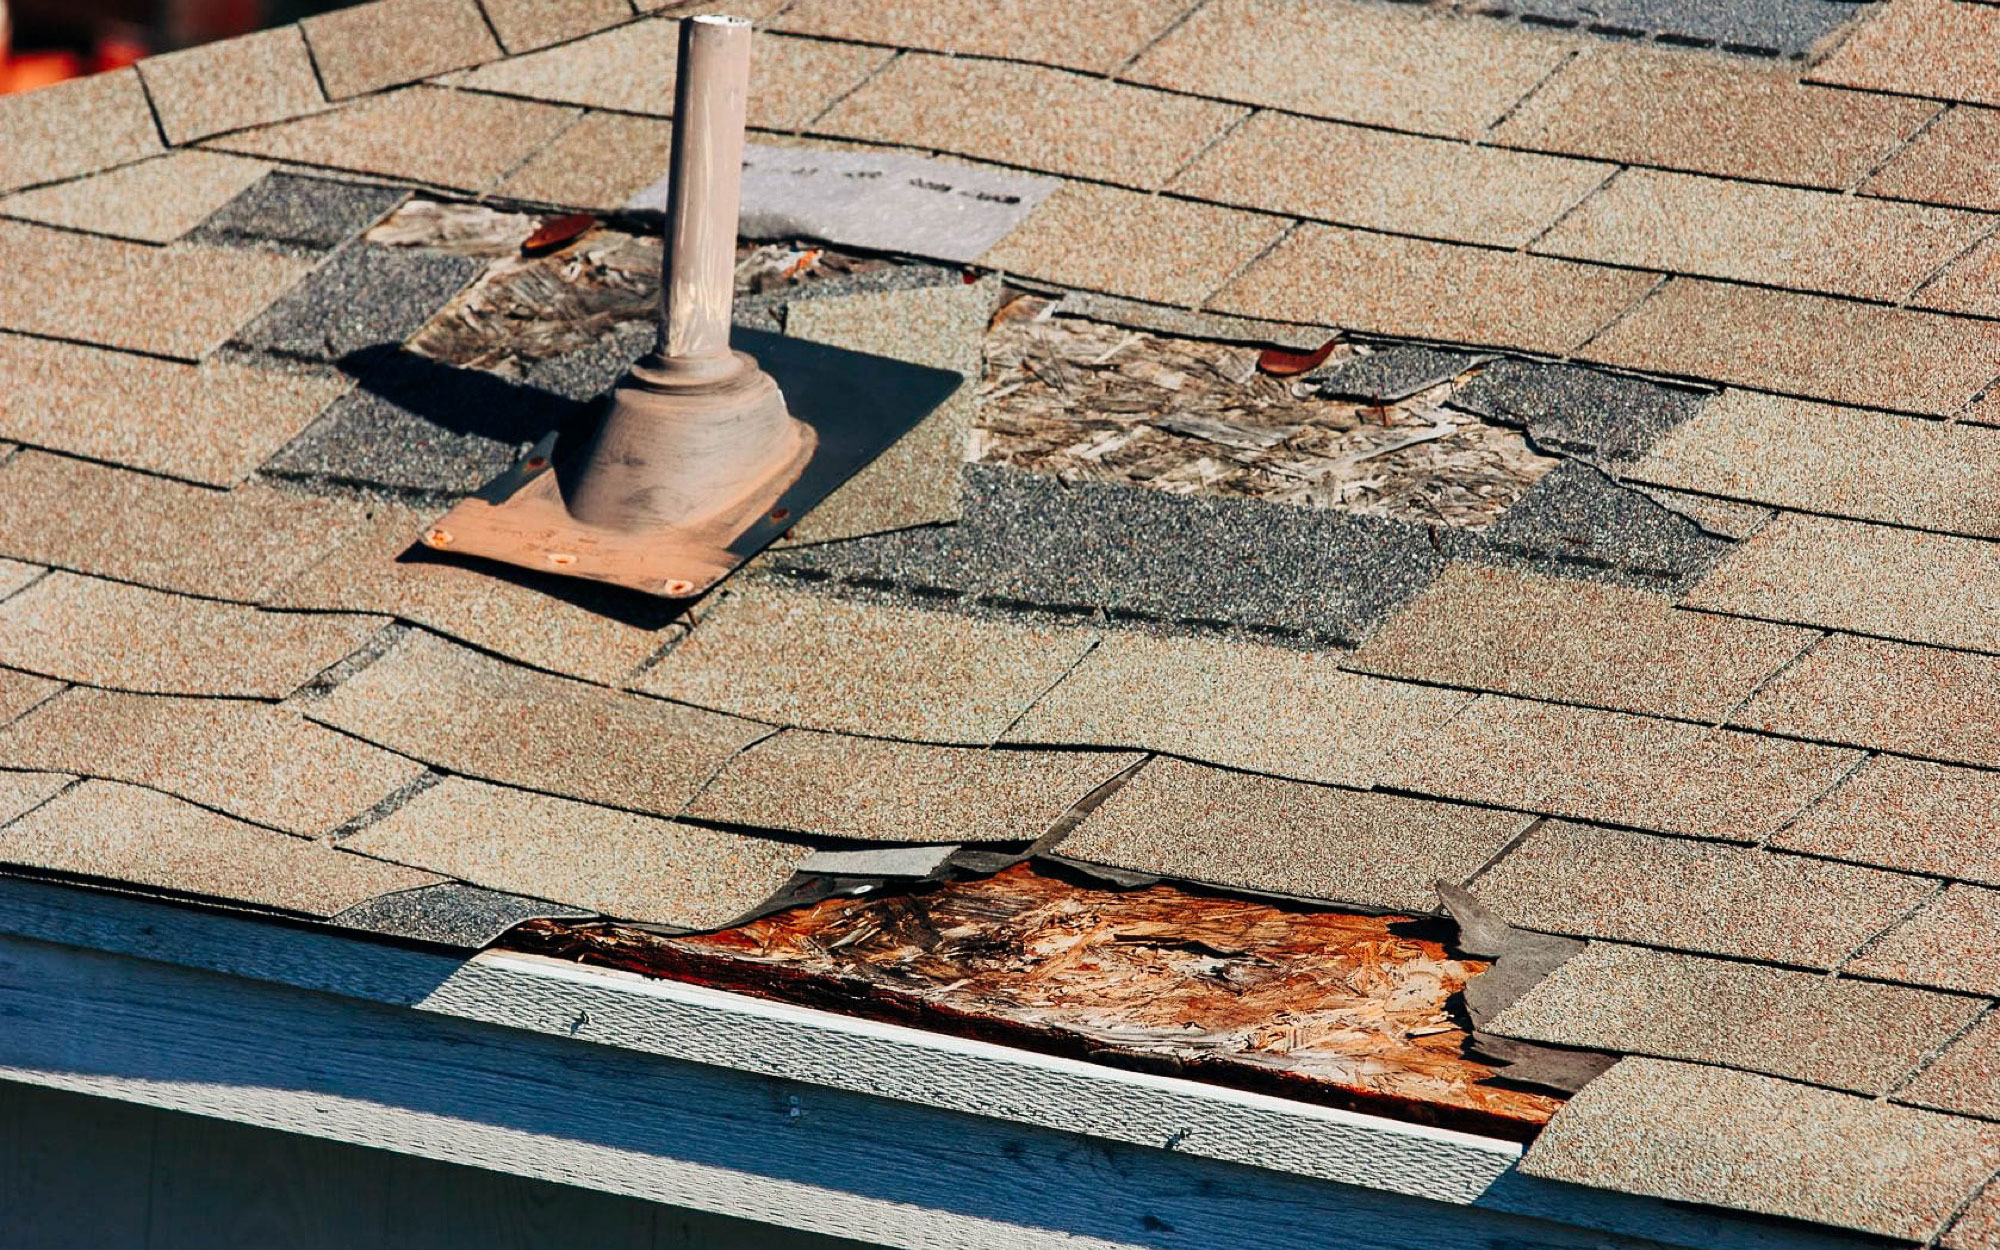 Badly damaged roof and shingles